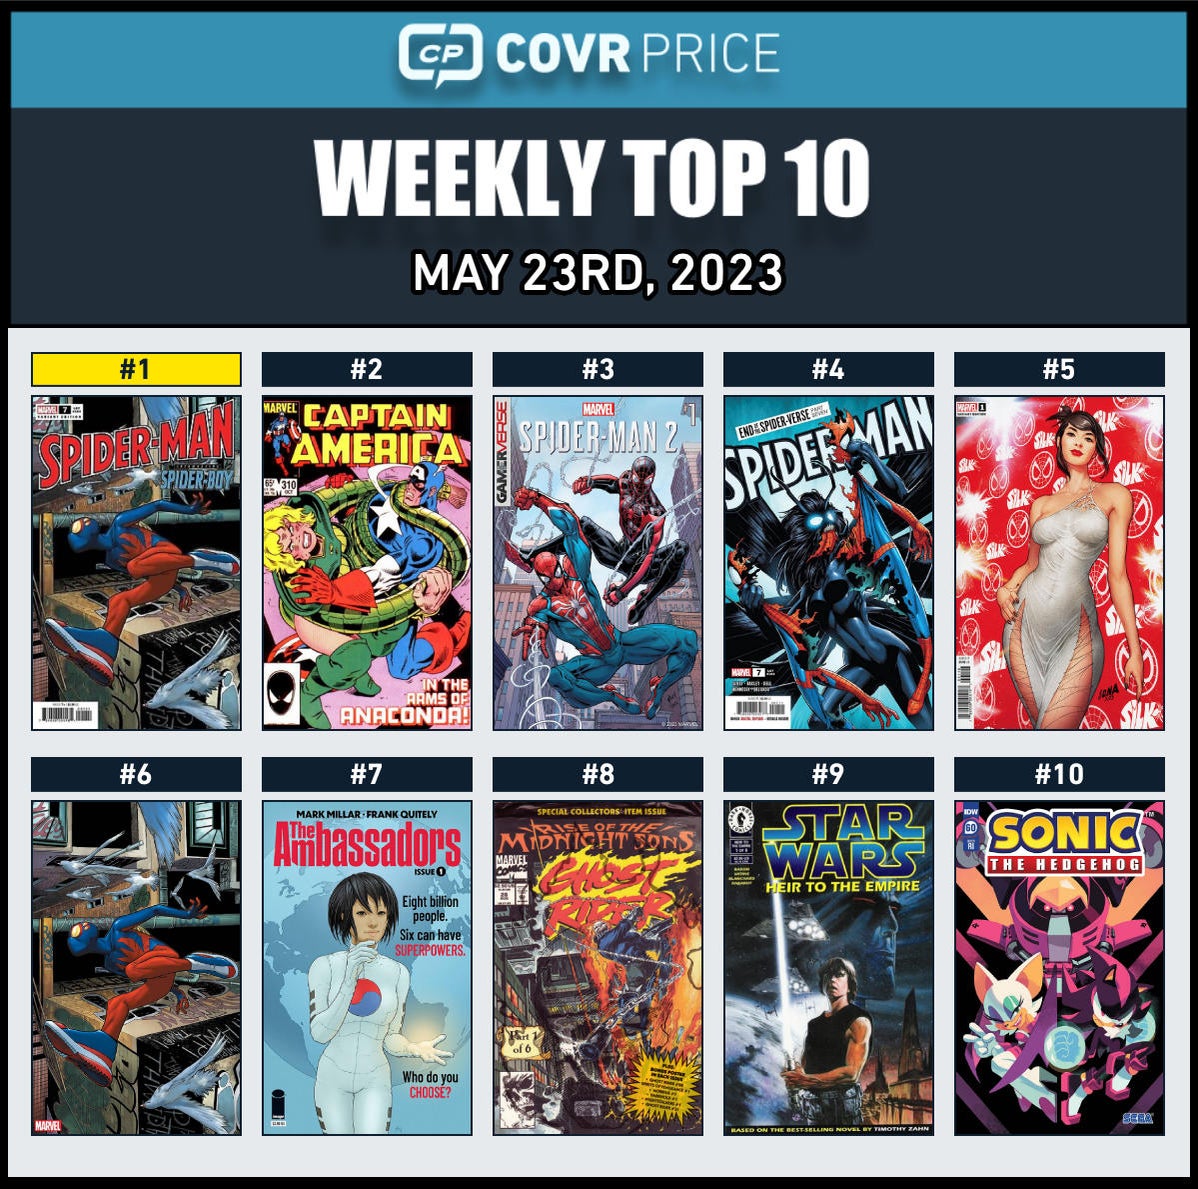 Top 10 Comic Books Rising in Value in the Last Week Include Sonic, Star Wars and a Lot of Spider-Man